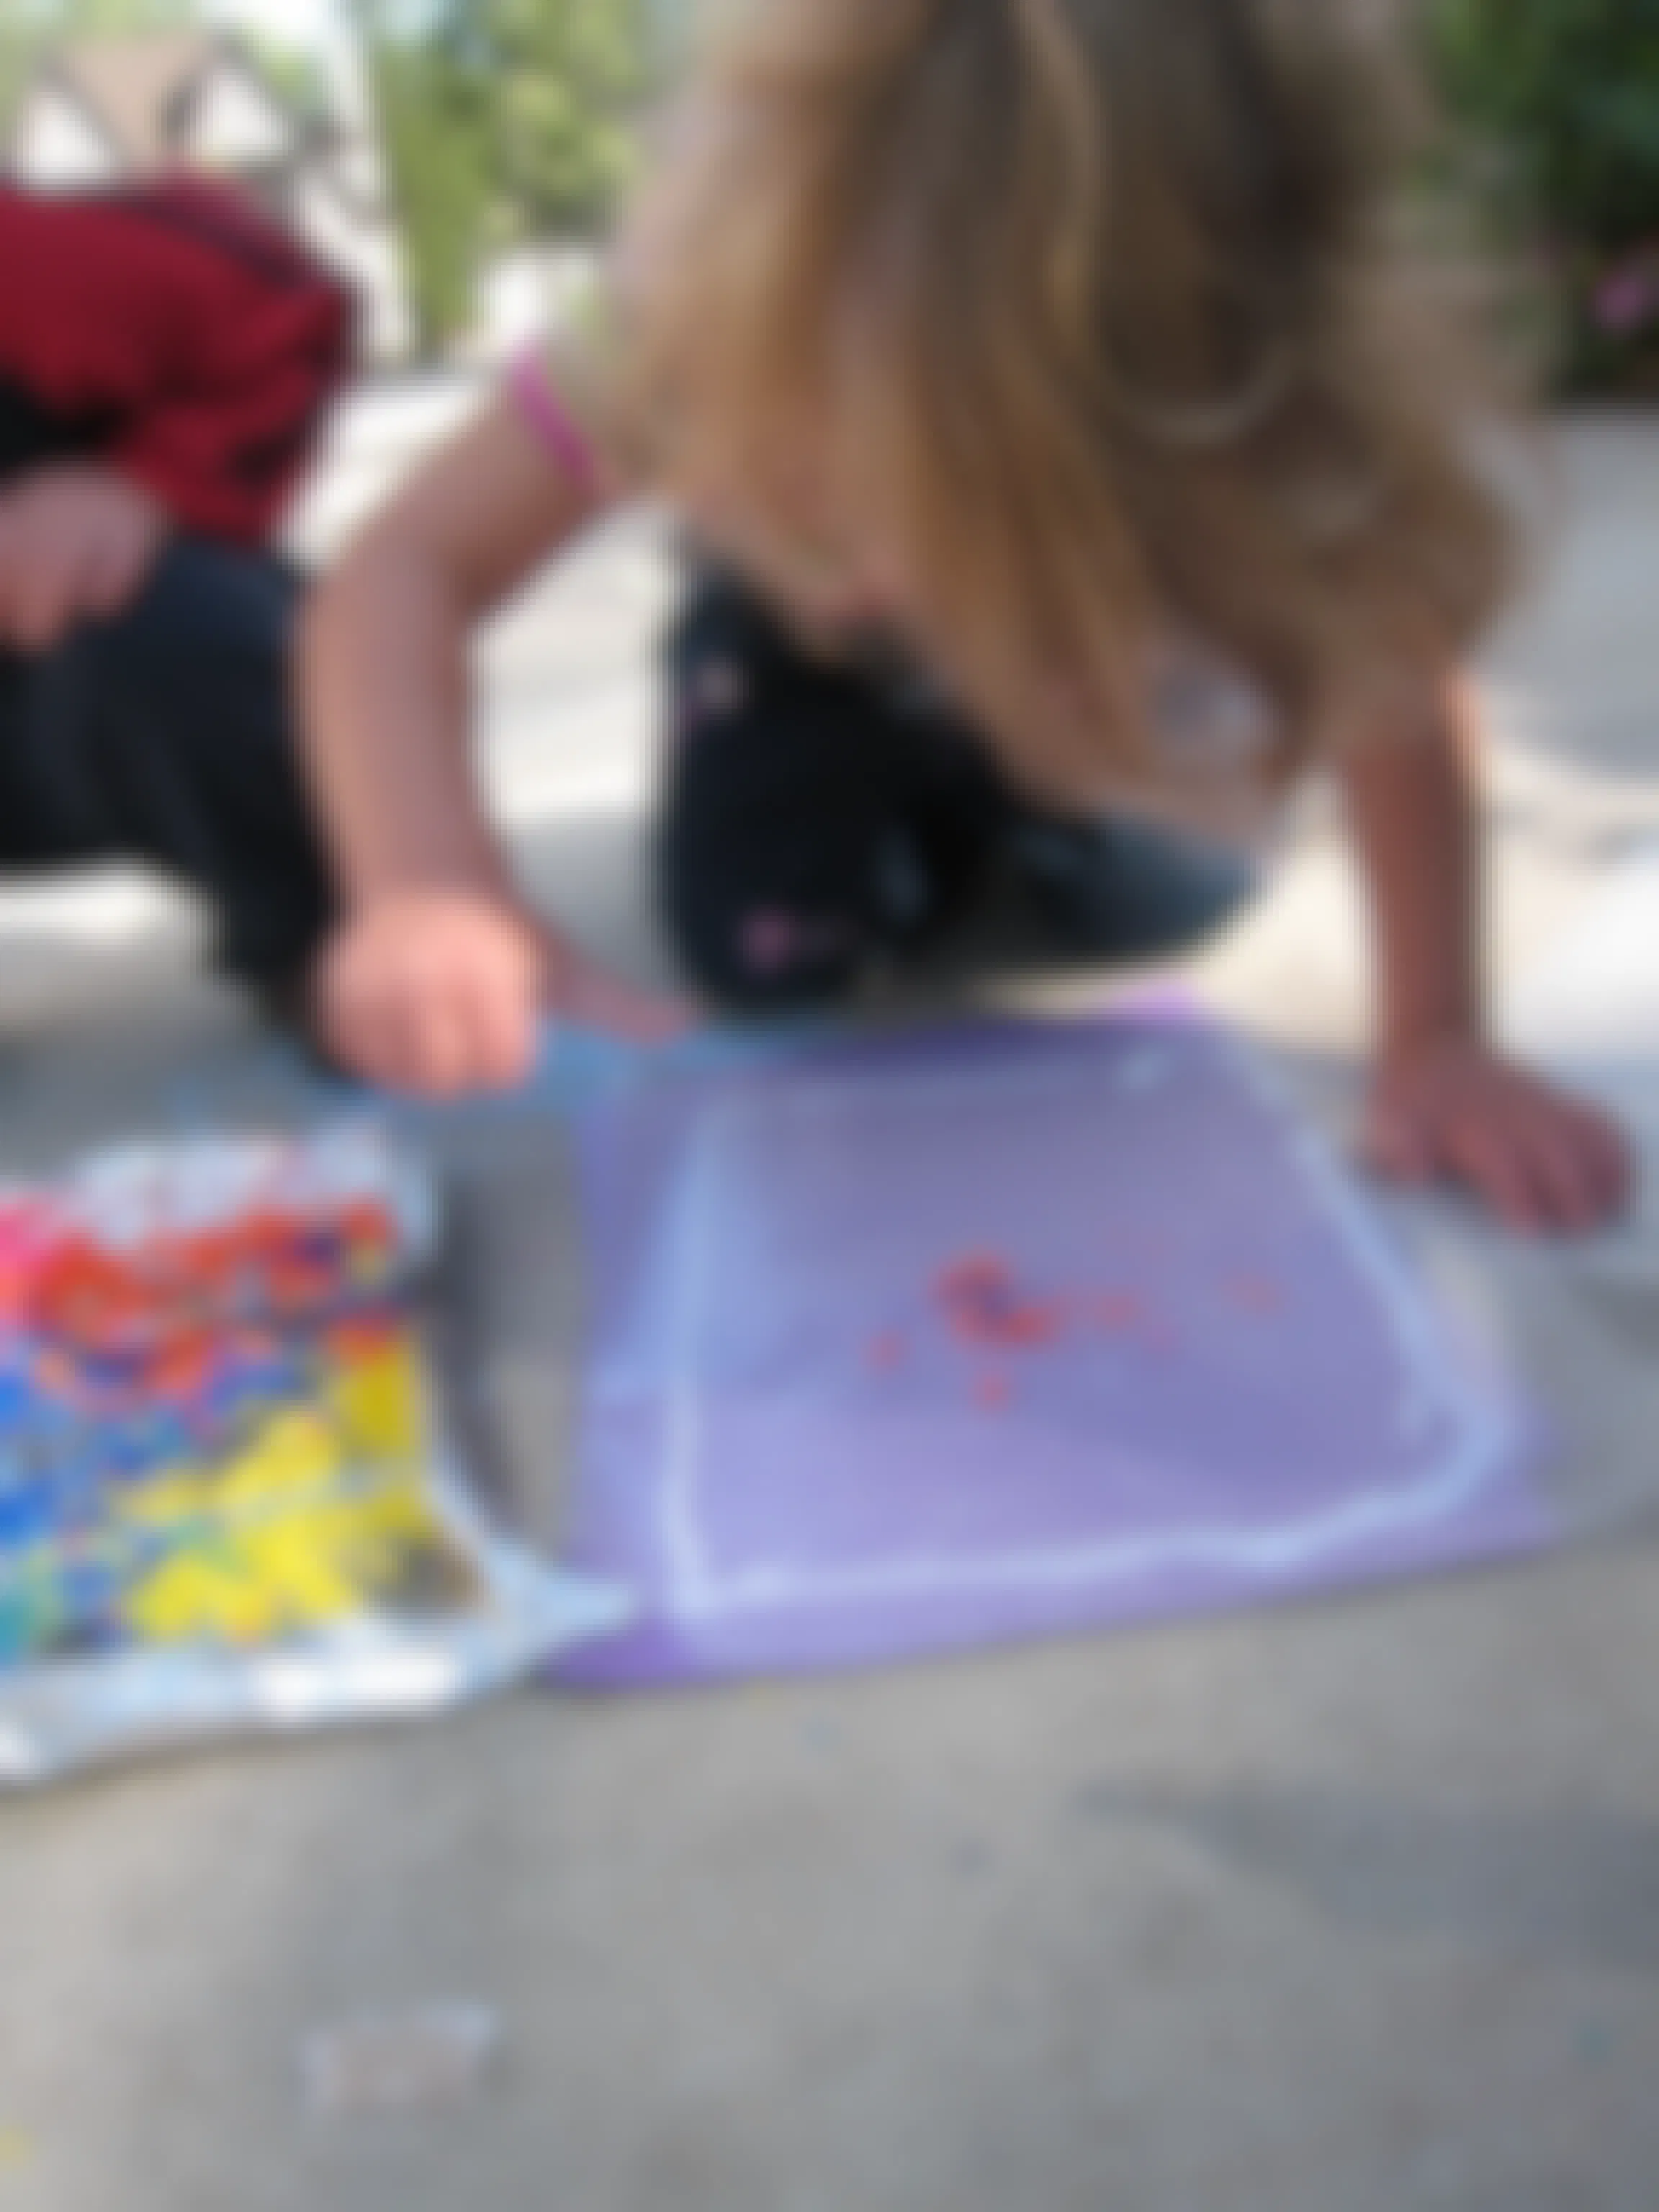 Let your kids create "stained glass" with crayons and wax paper.